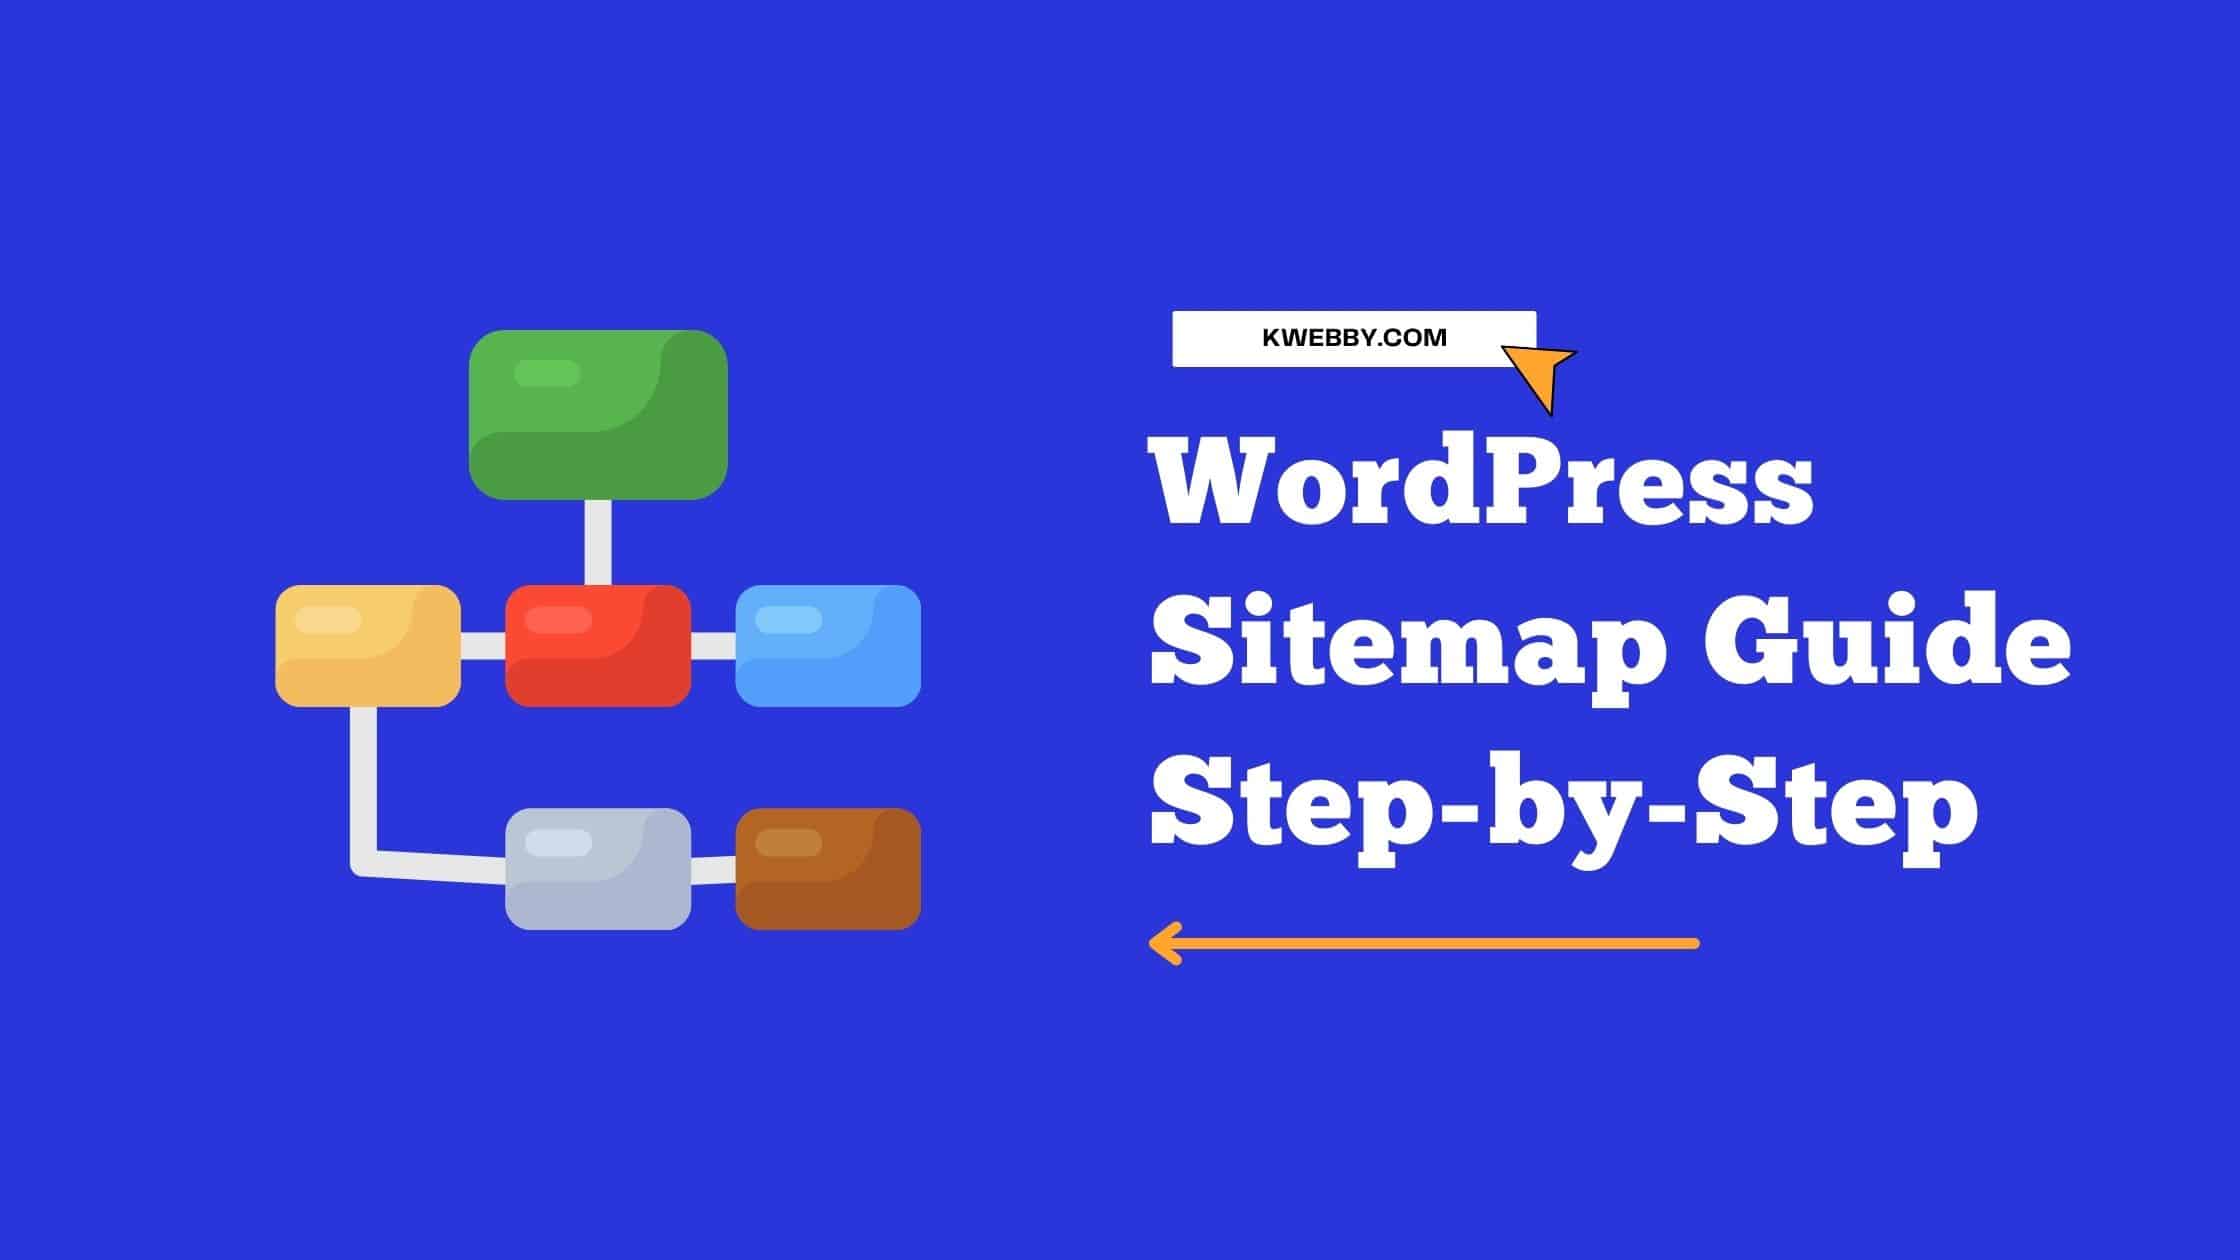 How to Add Your WordPress Sitemap to Search Engines: A Step-by-Step Guide